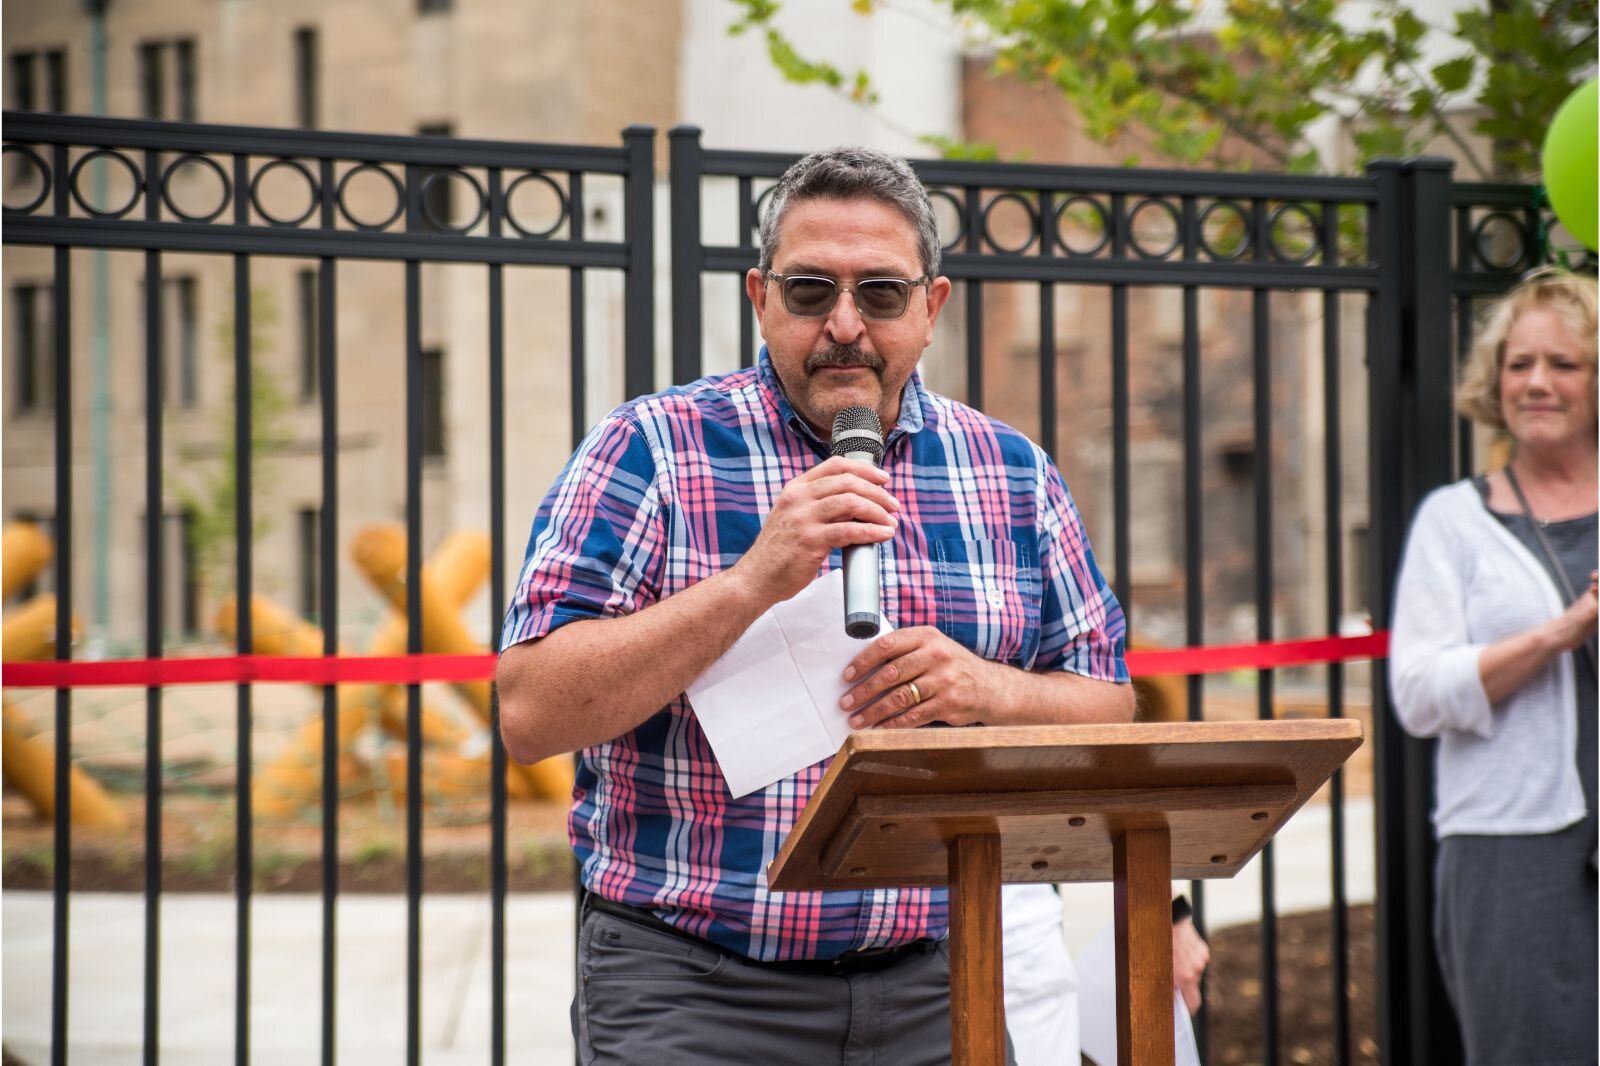 Howard Tejchma, Moderator for First Congregational Church,  offers remarks at the grand opening of Children’s Nature Playscape at Bronson Park. The church’s initial funding made it possible to purchase the property and begin the planning phase.